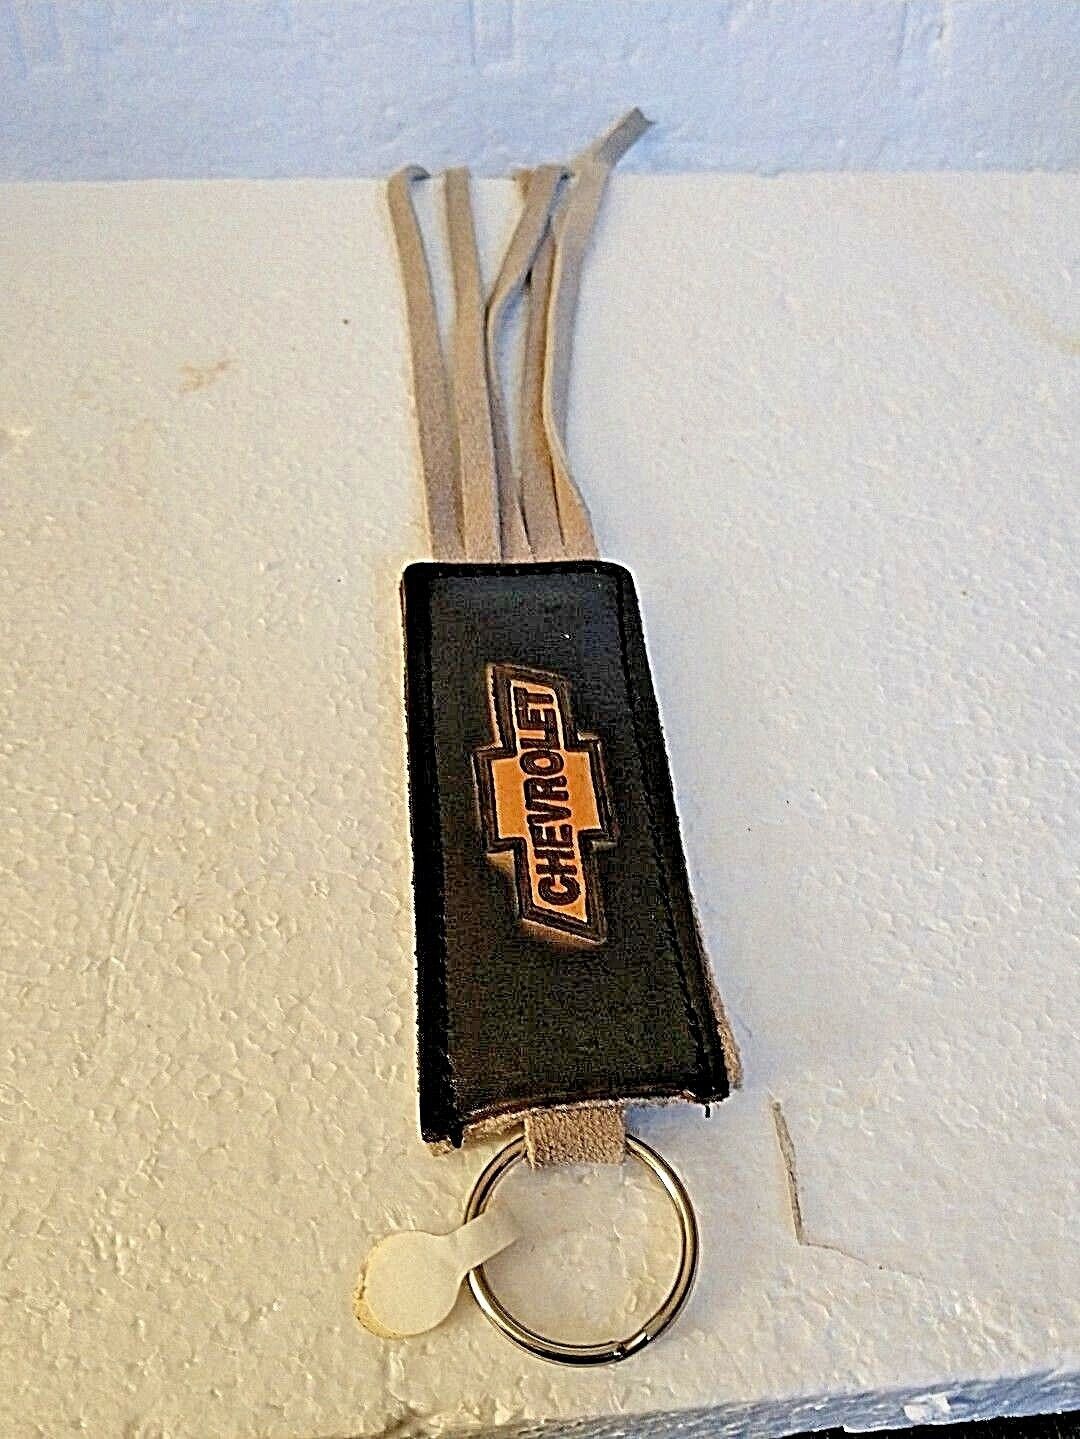 Primary image for CHEVROLET Key Ring New Leather with long Fringe  Belt Loop Grey/Black